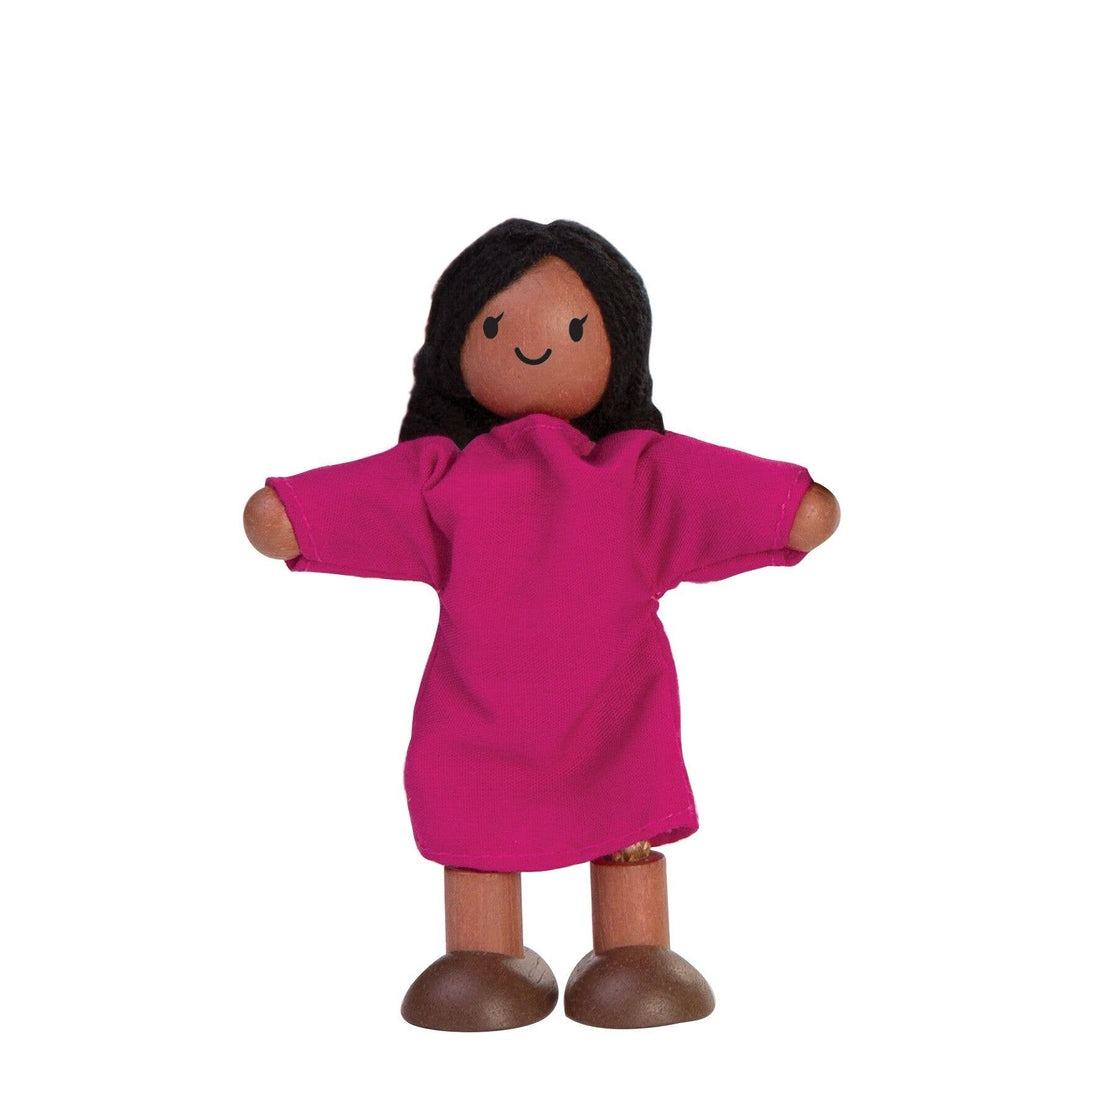 plan toys doll in a pink dress